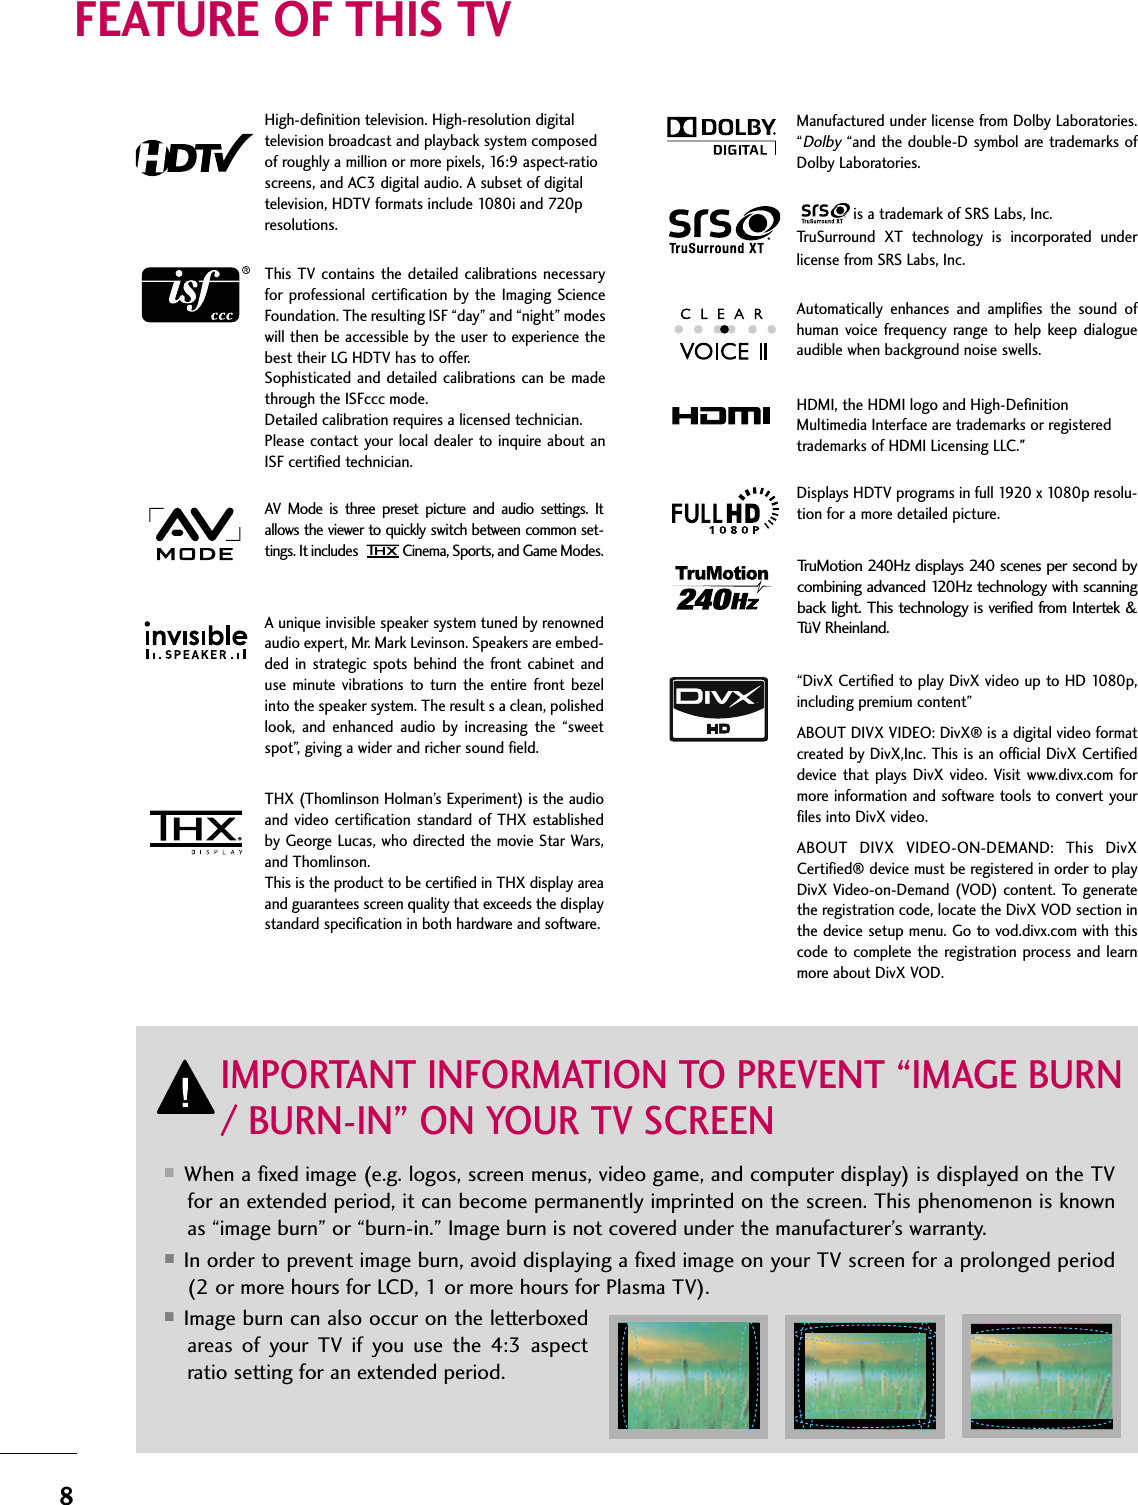 8FEATURE OF THIS TV■When a fixed image (e.g. logos, screen menus, video game, and computer display) is displayed on the TVfor an extended period, it can become permanently imprinted on the screen. This phenomenon is knownas “image burn” or “burn-in.” Image burn is not covered under the manufacturer’s warranty. ■In order to prevent image burn, avoid displaying a fixed image on your TV screen for a prolonged period(2 or more hours for LCD, 1 or more hours for Plasma TV). ■Image burn can also occur on the letterboxedareas  of  your  TV  if  you  use  the  4:3  aspectratio setting for an extended period.IMPORTANT INFORMATION TO PREVENT “IMAGE BURN/ BURN-IN” ON YOUR TV SCREENAV  Mode  is  three  preset  picture  and  audio  settings.  Itallows the viewer to quickly switch between common set-tings. It includes Cinema, Sports, and Game Modes.Displays HDTV programs in full 1920 x 1080p resolu-tion for a more detailed picture.Automatically  enhances  and  amplifies  the  sound  ofhuman  voice  frequency range  to  help  keep  dialogueaudible when background noise swells.A unique invisible speaker system tuned by renownedaudio expert, Mr. Mark Levinson. Speakers are embed-ded  in  strategic spots  behind the  front cabinet  anduse  minute  vibrations  to  turn  the  entire  front bezelinto the speaker system. The result s a clean, polishedlook,  and  enhanced  audio  by  increasing  the  “sweetspot”, giving a wider and richer sound field.HDMI, the HDMI logo and High-DefinitionMultimedia Interface are trademarks or registeredtrademarks of HDMI Licensing LLC.&quot;is a trademark of SRS Labs, Inc.TruSurround  XT  technology  is  incorporated  underlicense from SRS Labs, Inc.Manufactured under license from Dolby Laboratories.“Dolby“and the double-D symbol are trademarks ofDolby Laboratories. This TV contains the  detailed calibrations necessaryfor professional  certification by  the  Imaging  ScienceFoundation. The resulting ISF “day” and “night” modeswill then be accessible by the user to experience thebest their LG HDTV has to offer.Sophisticated  and detailed  calibrations  can be madethrough the ISFccc mode.Detailed calibration requires a licensed technician.Please contact your  local dealer to inquire  about anISF certified technician.High-definition television. High-resolution digitaltelevision broadcast and playback system composedof roughly a million or more pixels, 16:9 aspect-ratioscreens, and AC3 digital audio. A subset of digitaltelevision, HDTV formats include 1080i and 720presolutions.TruMotion 240Hz displays 240 scenes per second bycombining advanced 120Hz technology with scanningback light.  This technology is verified from Intertek &amp;TüV Rheinland.“DivX Certified to play DivX video up to HD 1080p,including premium content”ABOUT DIVX VIDEO: DivX® is a digital video formatcreated by DivX,Inc. This is an official DivX Certifieddevice that  plays  DivX  video.  Visit www.divx.com  formore information and software tools to convert yourfiles into DivX video.ABOUT  DIVX  VIDEO-ON-DEMAND:  This  DivXCertified® device must be registered in order to playDivX Video-on-Demand (VOD) content. To generatethe registration code, locate the DivX VOD section inthe device setup menu. Go to vod.divx.com with thiscode to  complete  the  registration process and learnmore about DivX VOD. THX (Thomlinson Holman’s Experiment) is the audioand  video  certification standard  of  THX  establishedby George Lucas, who directed the movie Star Wars,and Thomlinson. This is the product to be certified in THX display areaand guarantees screen quality that exceeds the displaystandard specification in both hardware and software. 